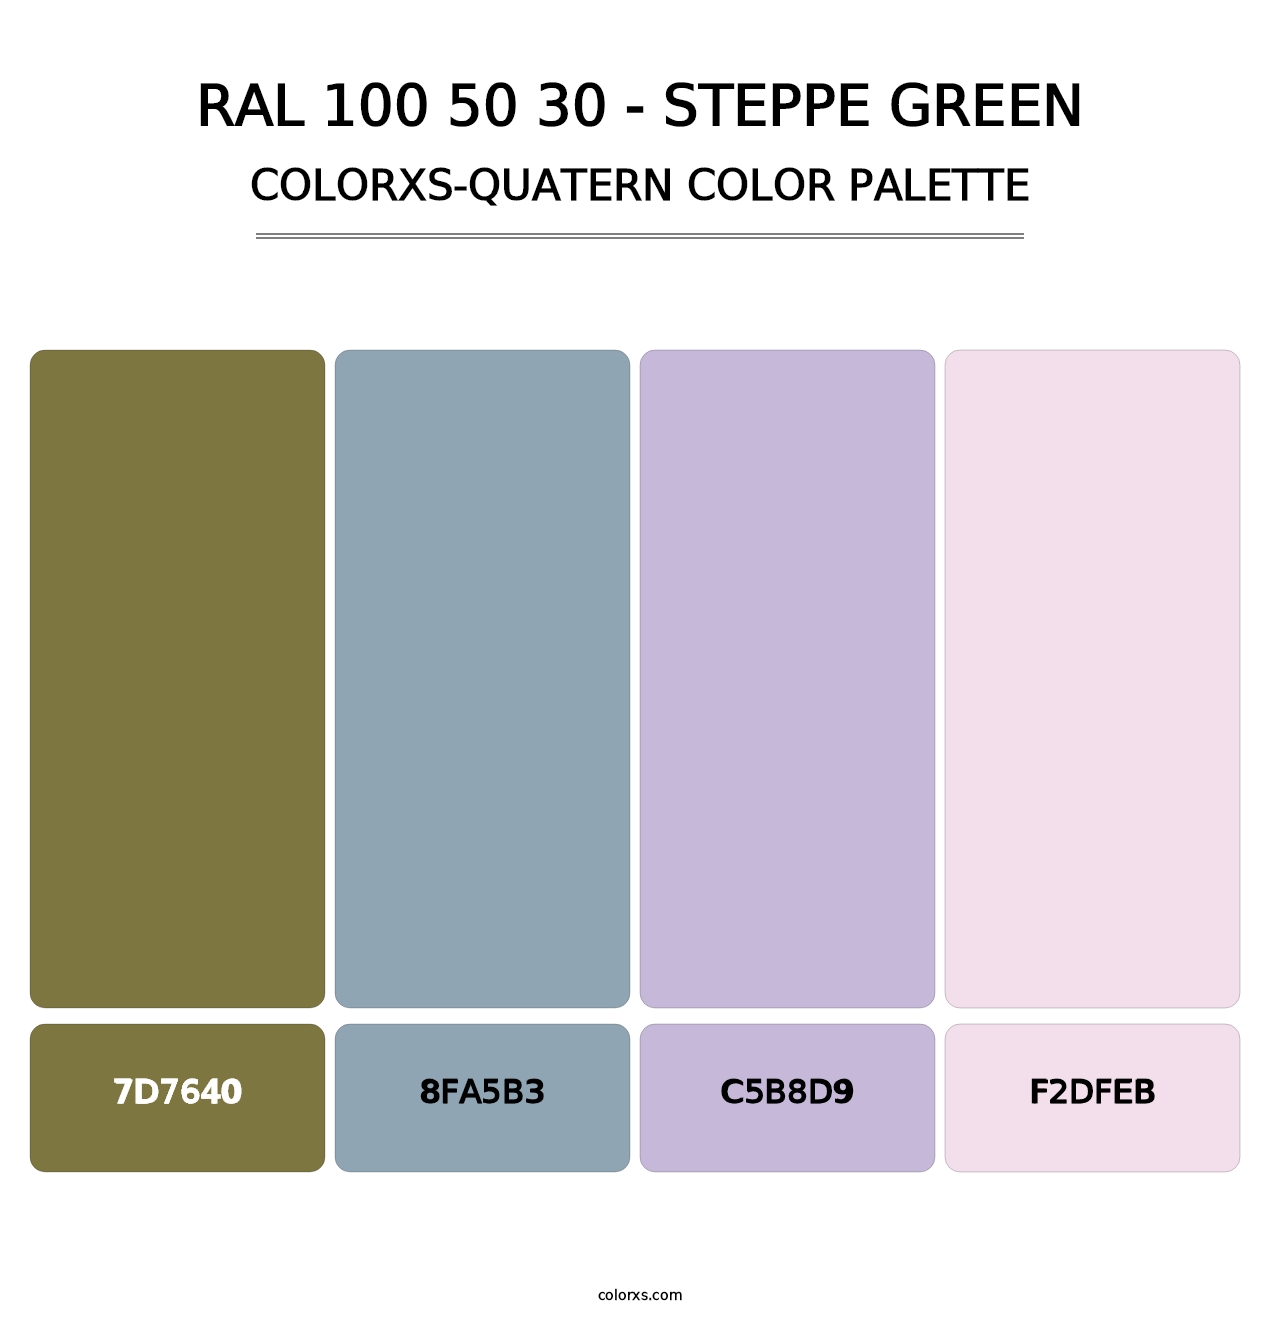 RAL 100 50 30 - Steppe Green - Colorxs Quatern Palette